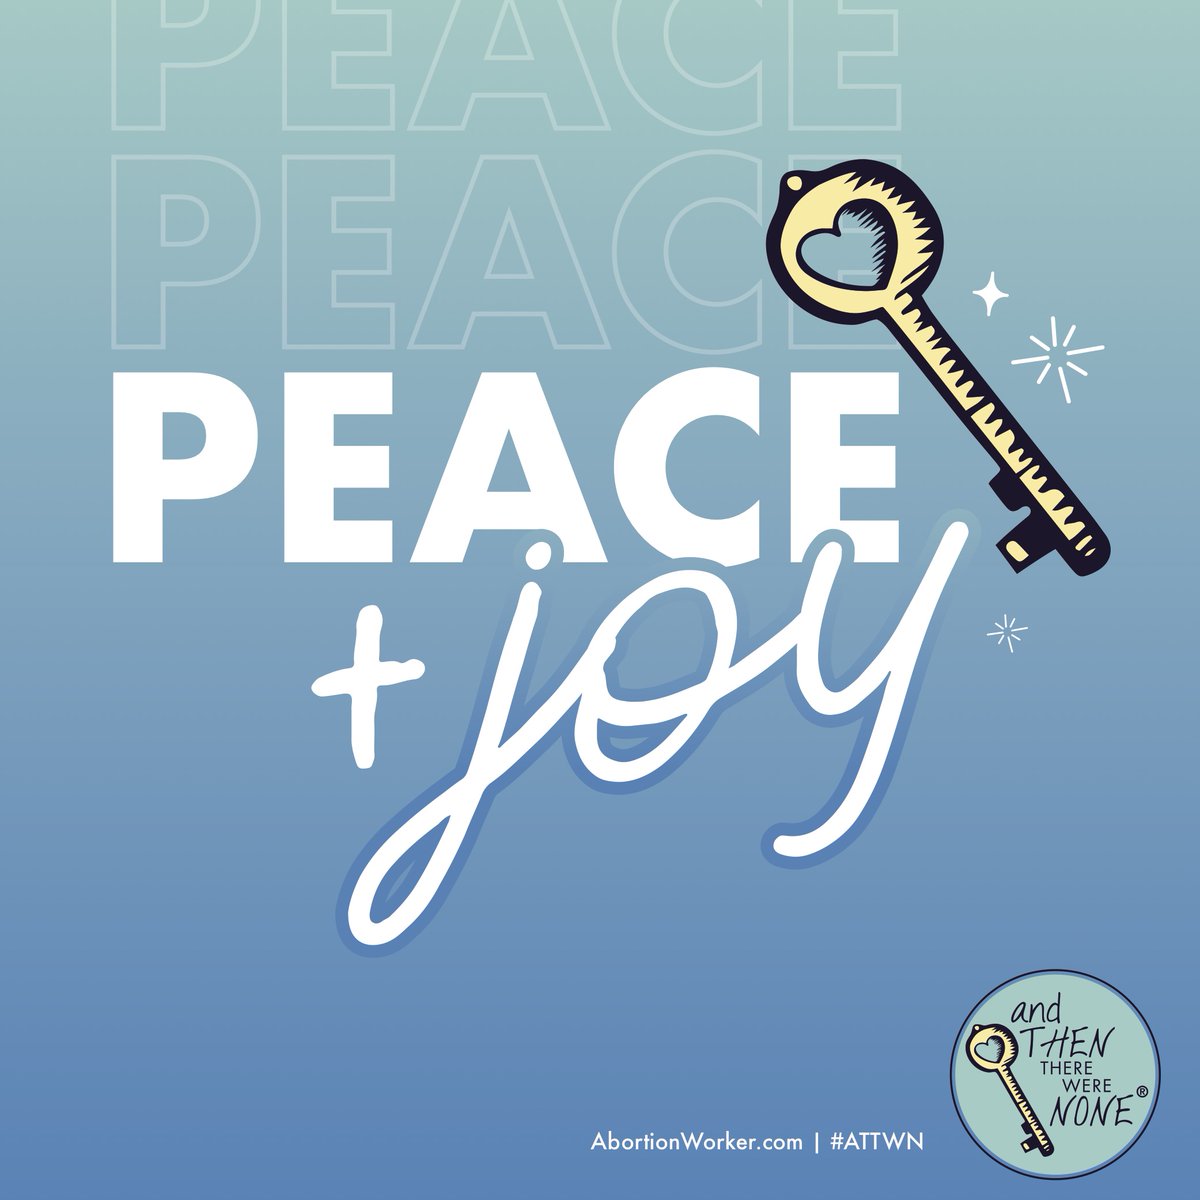 This is what awaits #abortionworkers on the other side of that door, and we have the key to unlock it. 

Text 888-570-5501 to QUIT TODAY! 

#peace #joy #FREEDOM